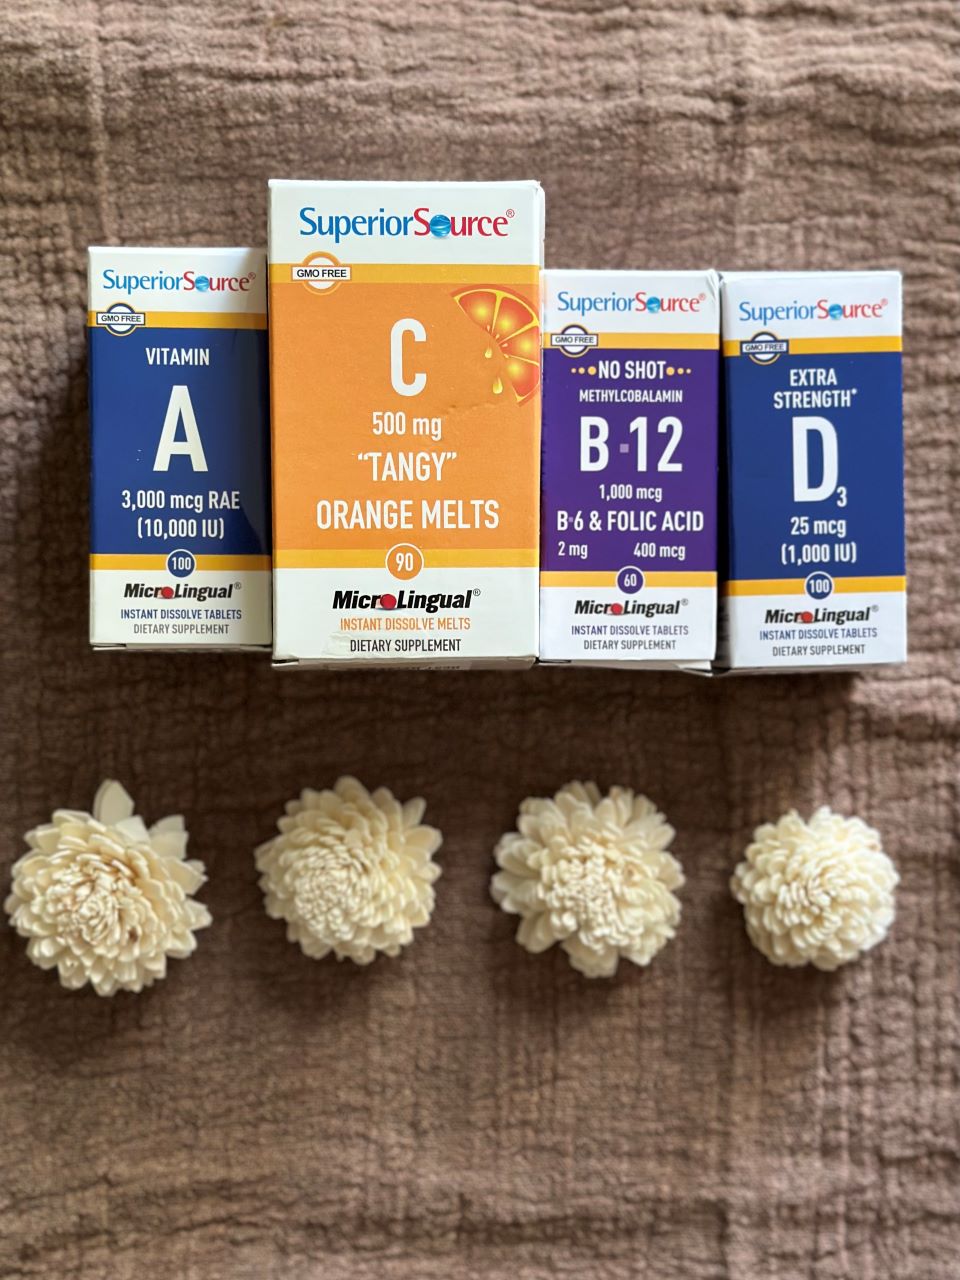 The Four Microlingual Vitamins I’m Currently Taking: